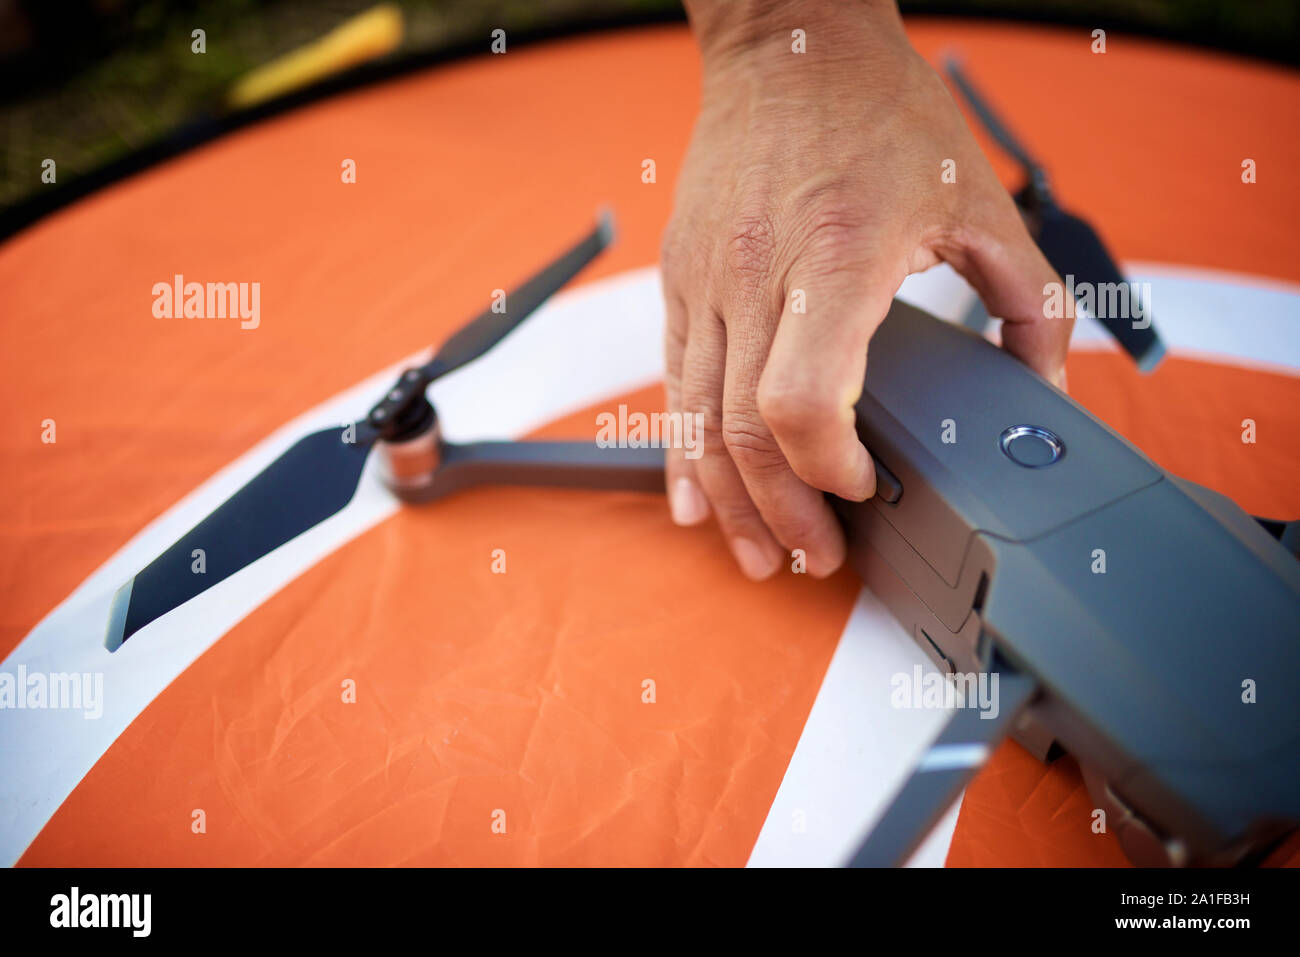 Close-up of a man preparing a drone to fly. Stock Photo